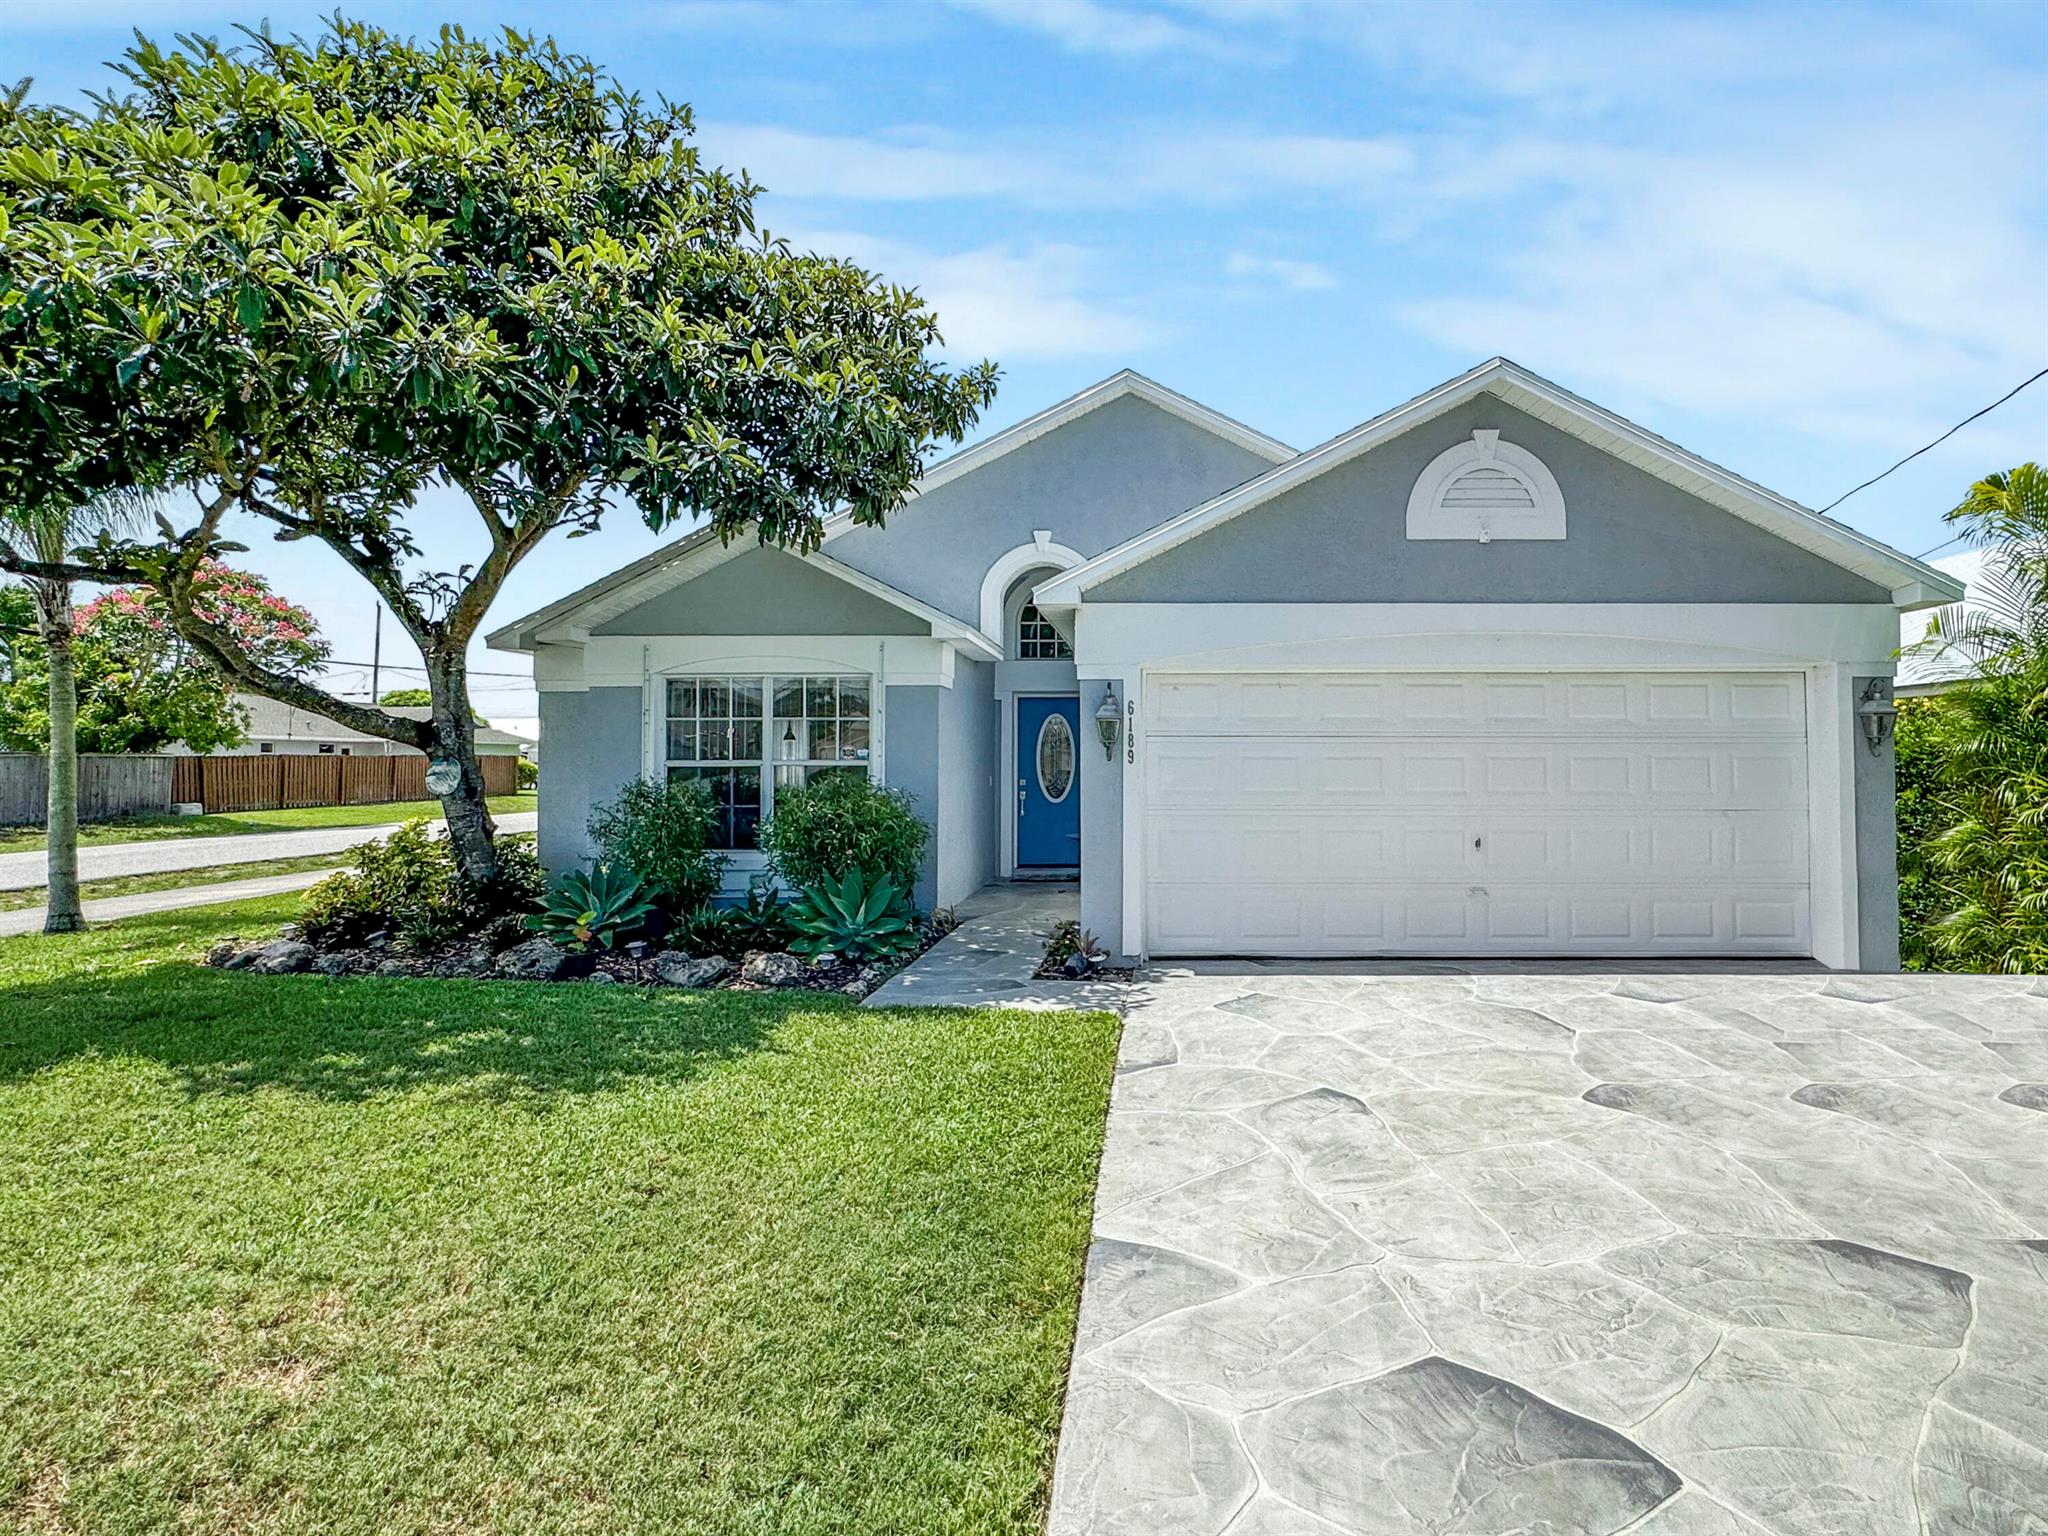 COME CHECK OUT THIS FULLY RENOVATED OASIS!!! BRAND NEW FRIGIDAIRE APPLIANCES. BRIGHT OPEN FLOOR PLAN, PORCELAIN PLANK FLOORS, HIGH VAULTED CEILINGS, LARGE EAT IN KITCHEN. SPRINKLER SYSTEM, LARGE CORNER LOT, ROOF, AC AND HOT WATER HEATER REPLACED IN 2019. APOXY GARAGE FLOOR. INCREDIBLE LOCATION IN JUPITER. NO HOA. AWAY FROM I 95. CBS Motivated Seller!!